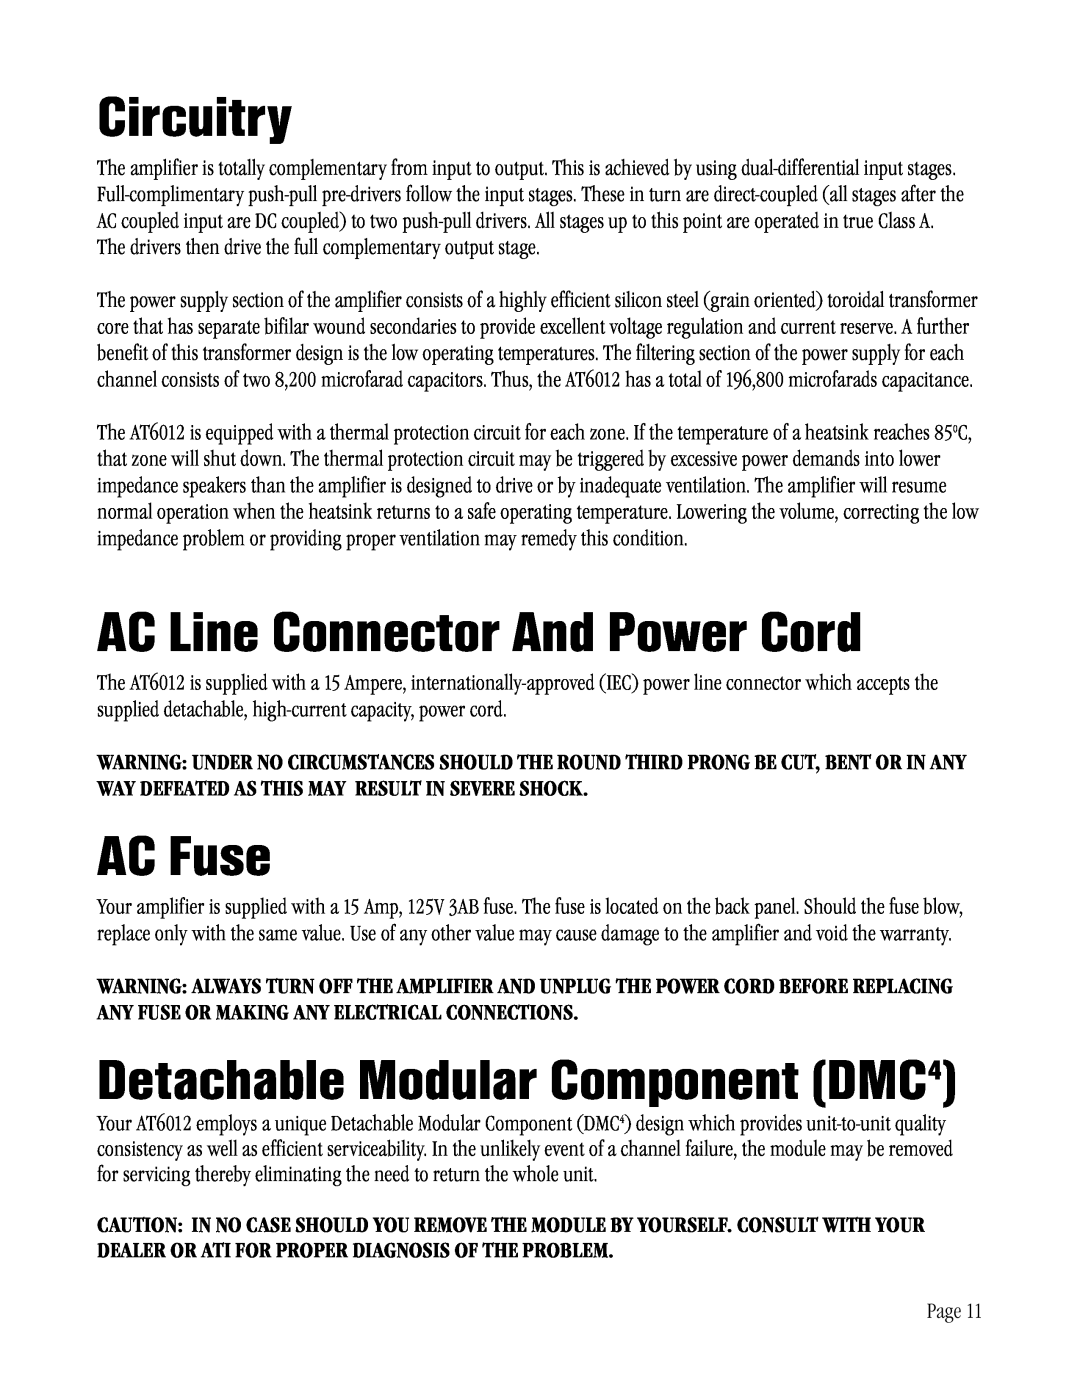 Amplifier Tech AT6012 manual Circuitry, AC Fuse, AC Line Connector And Power Cord, Detachable Modular Component DMC4 